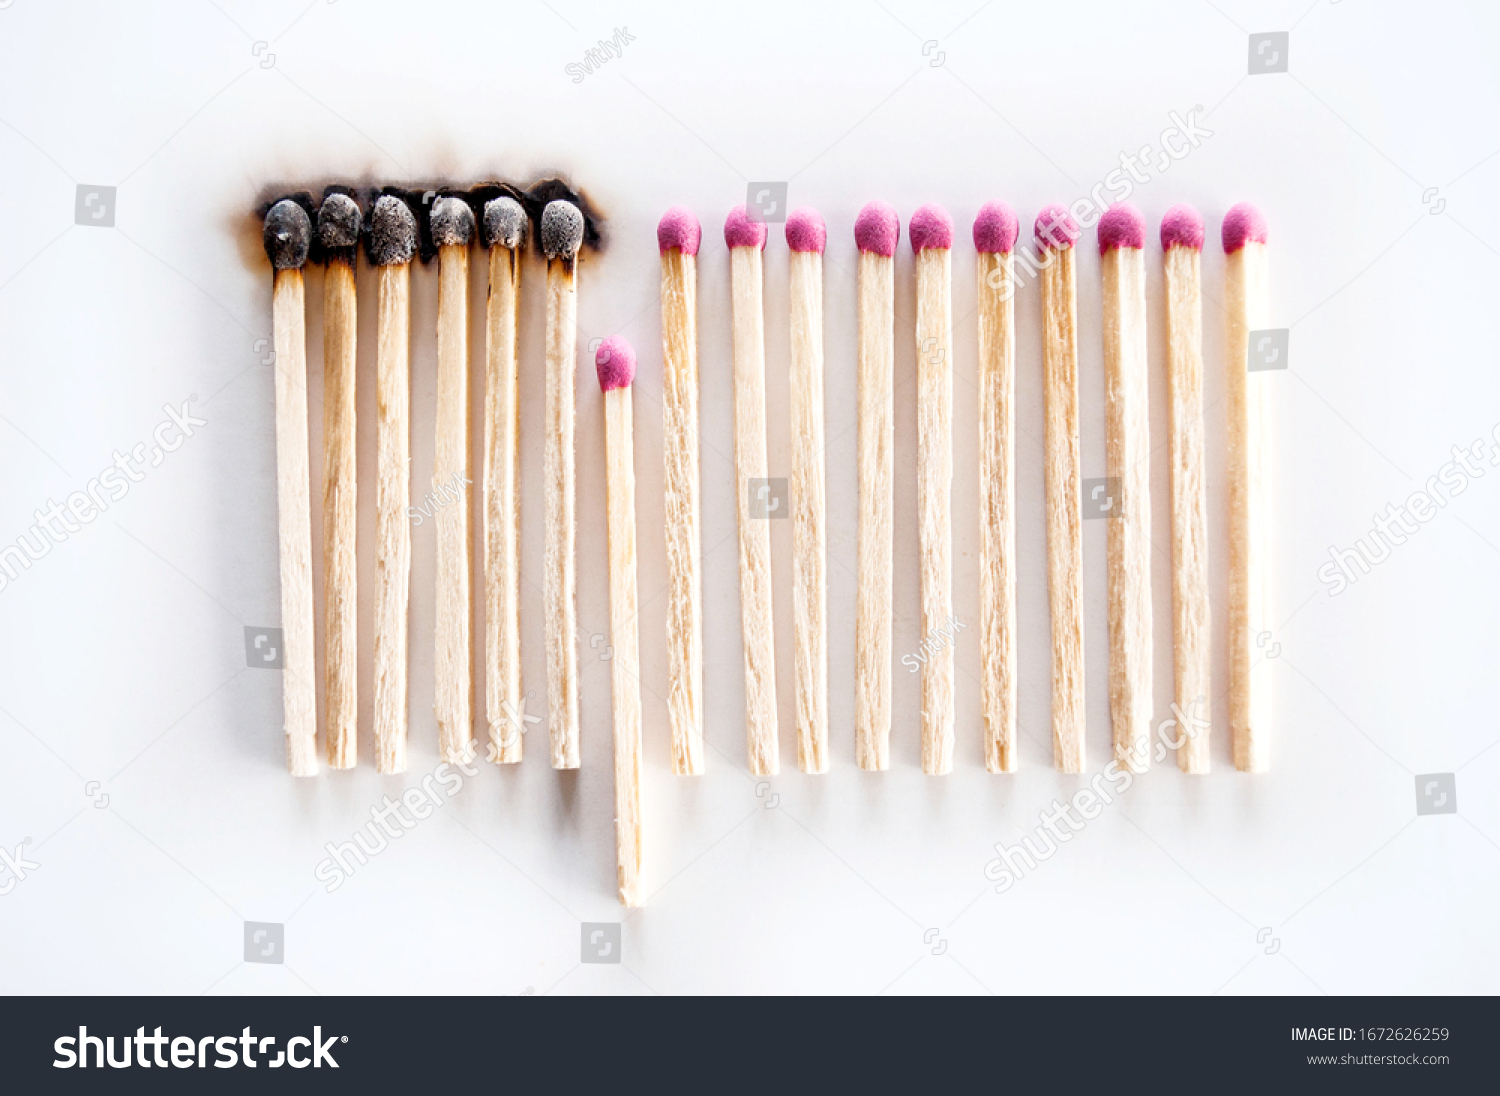 Burnt matches and whole matches on white background. The spread of fire. One whole match isolated to stop the fire. Stop destruction concept #1672626259